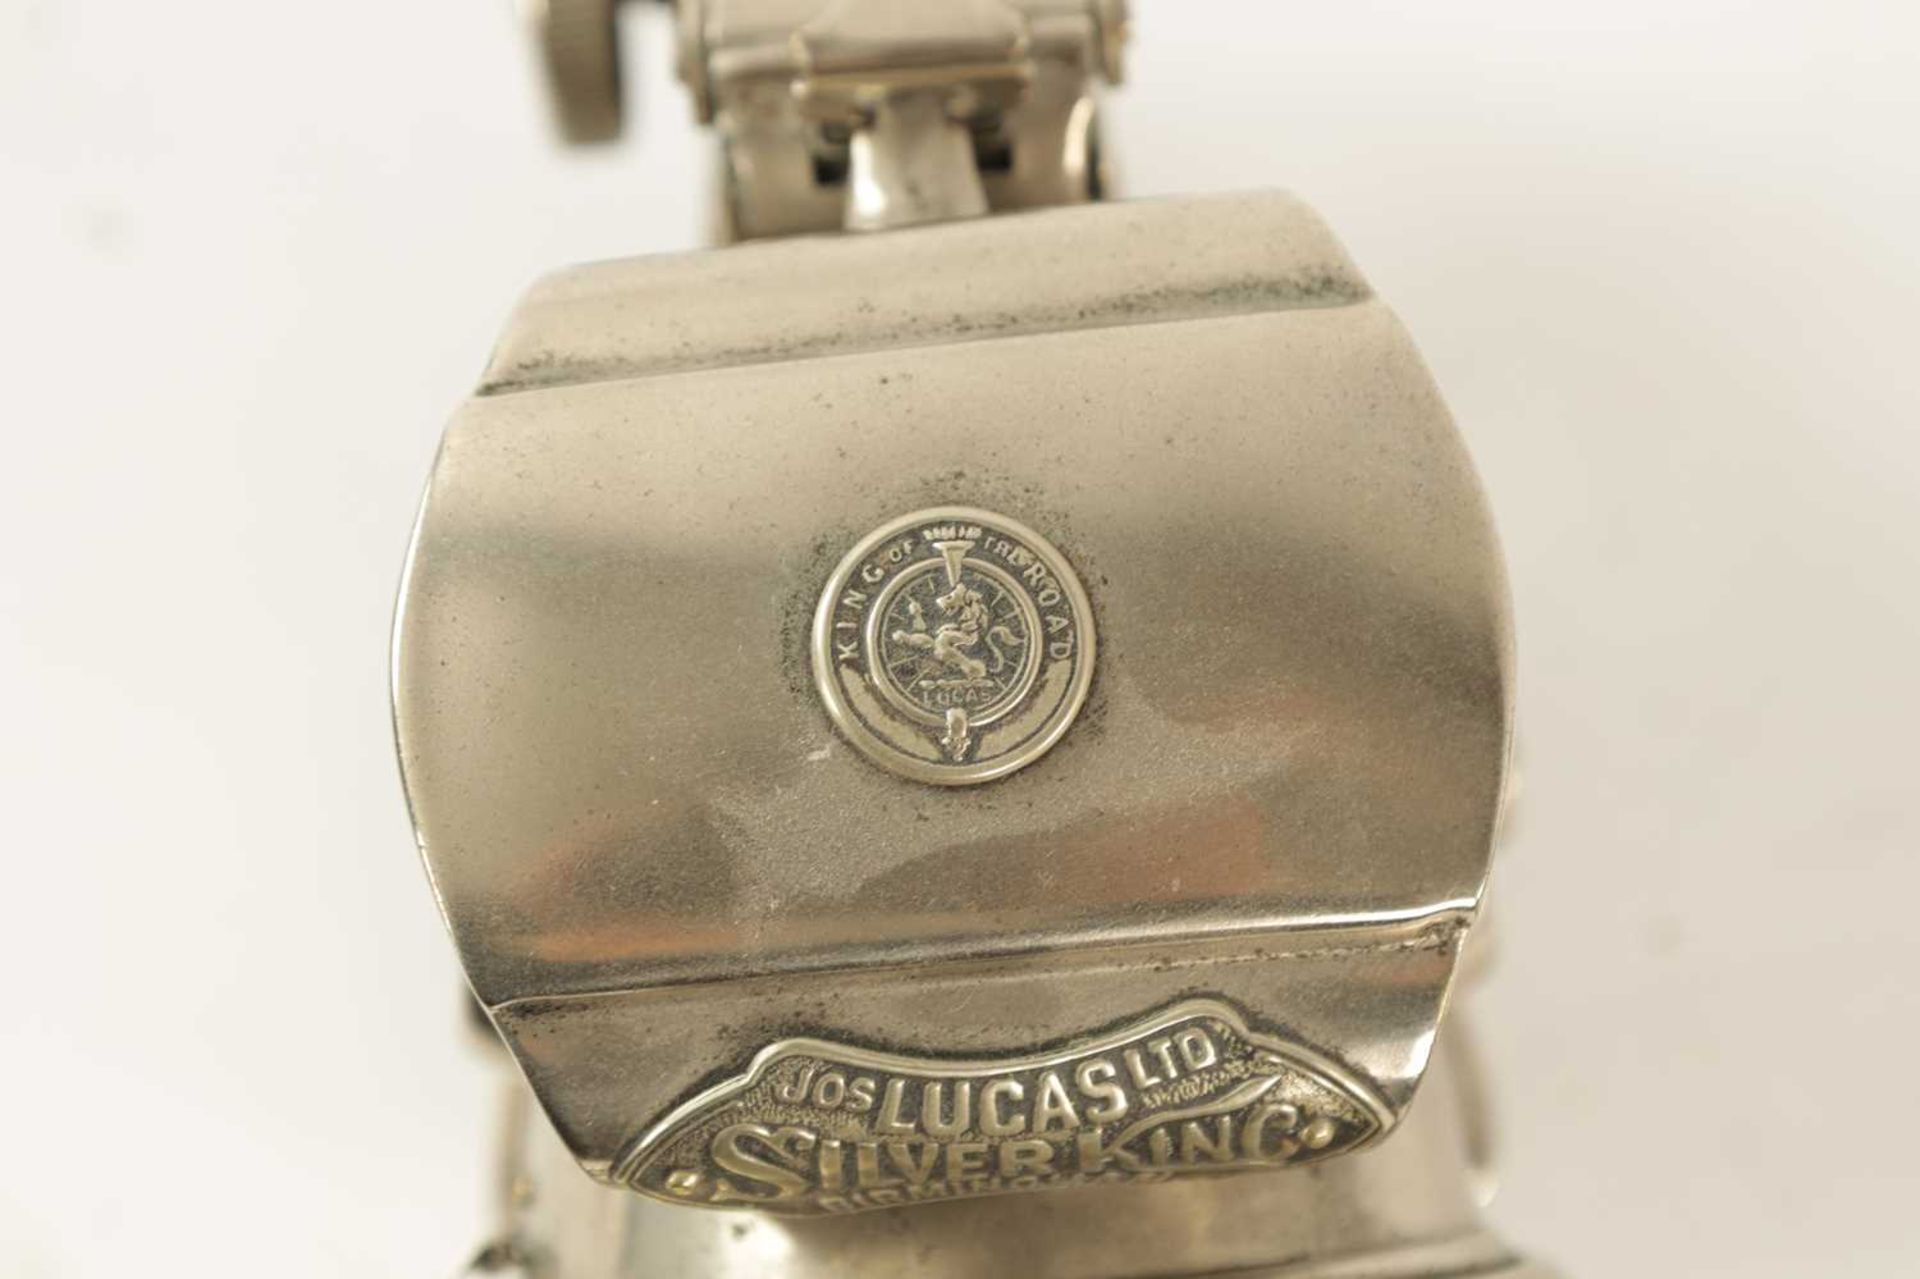 A VINTAGE LUCAS SILVER KING BIRMINGHAM CYCLE LIGHT - Image 3 of 8